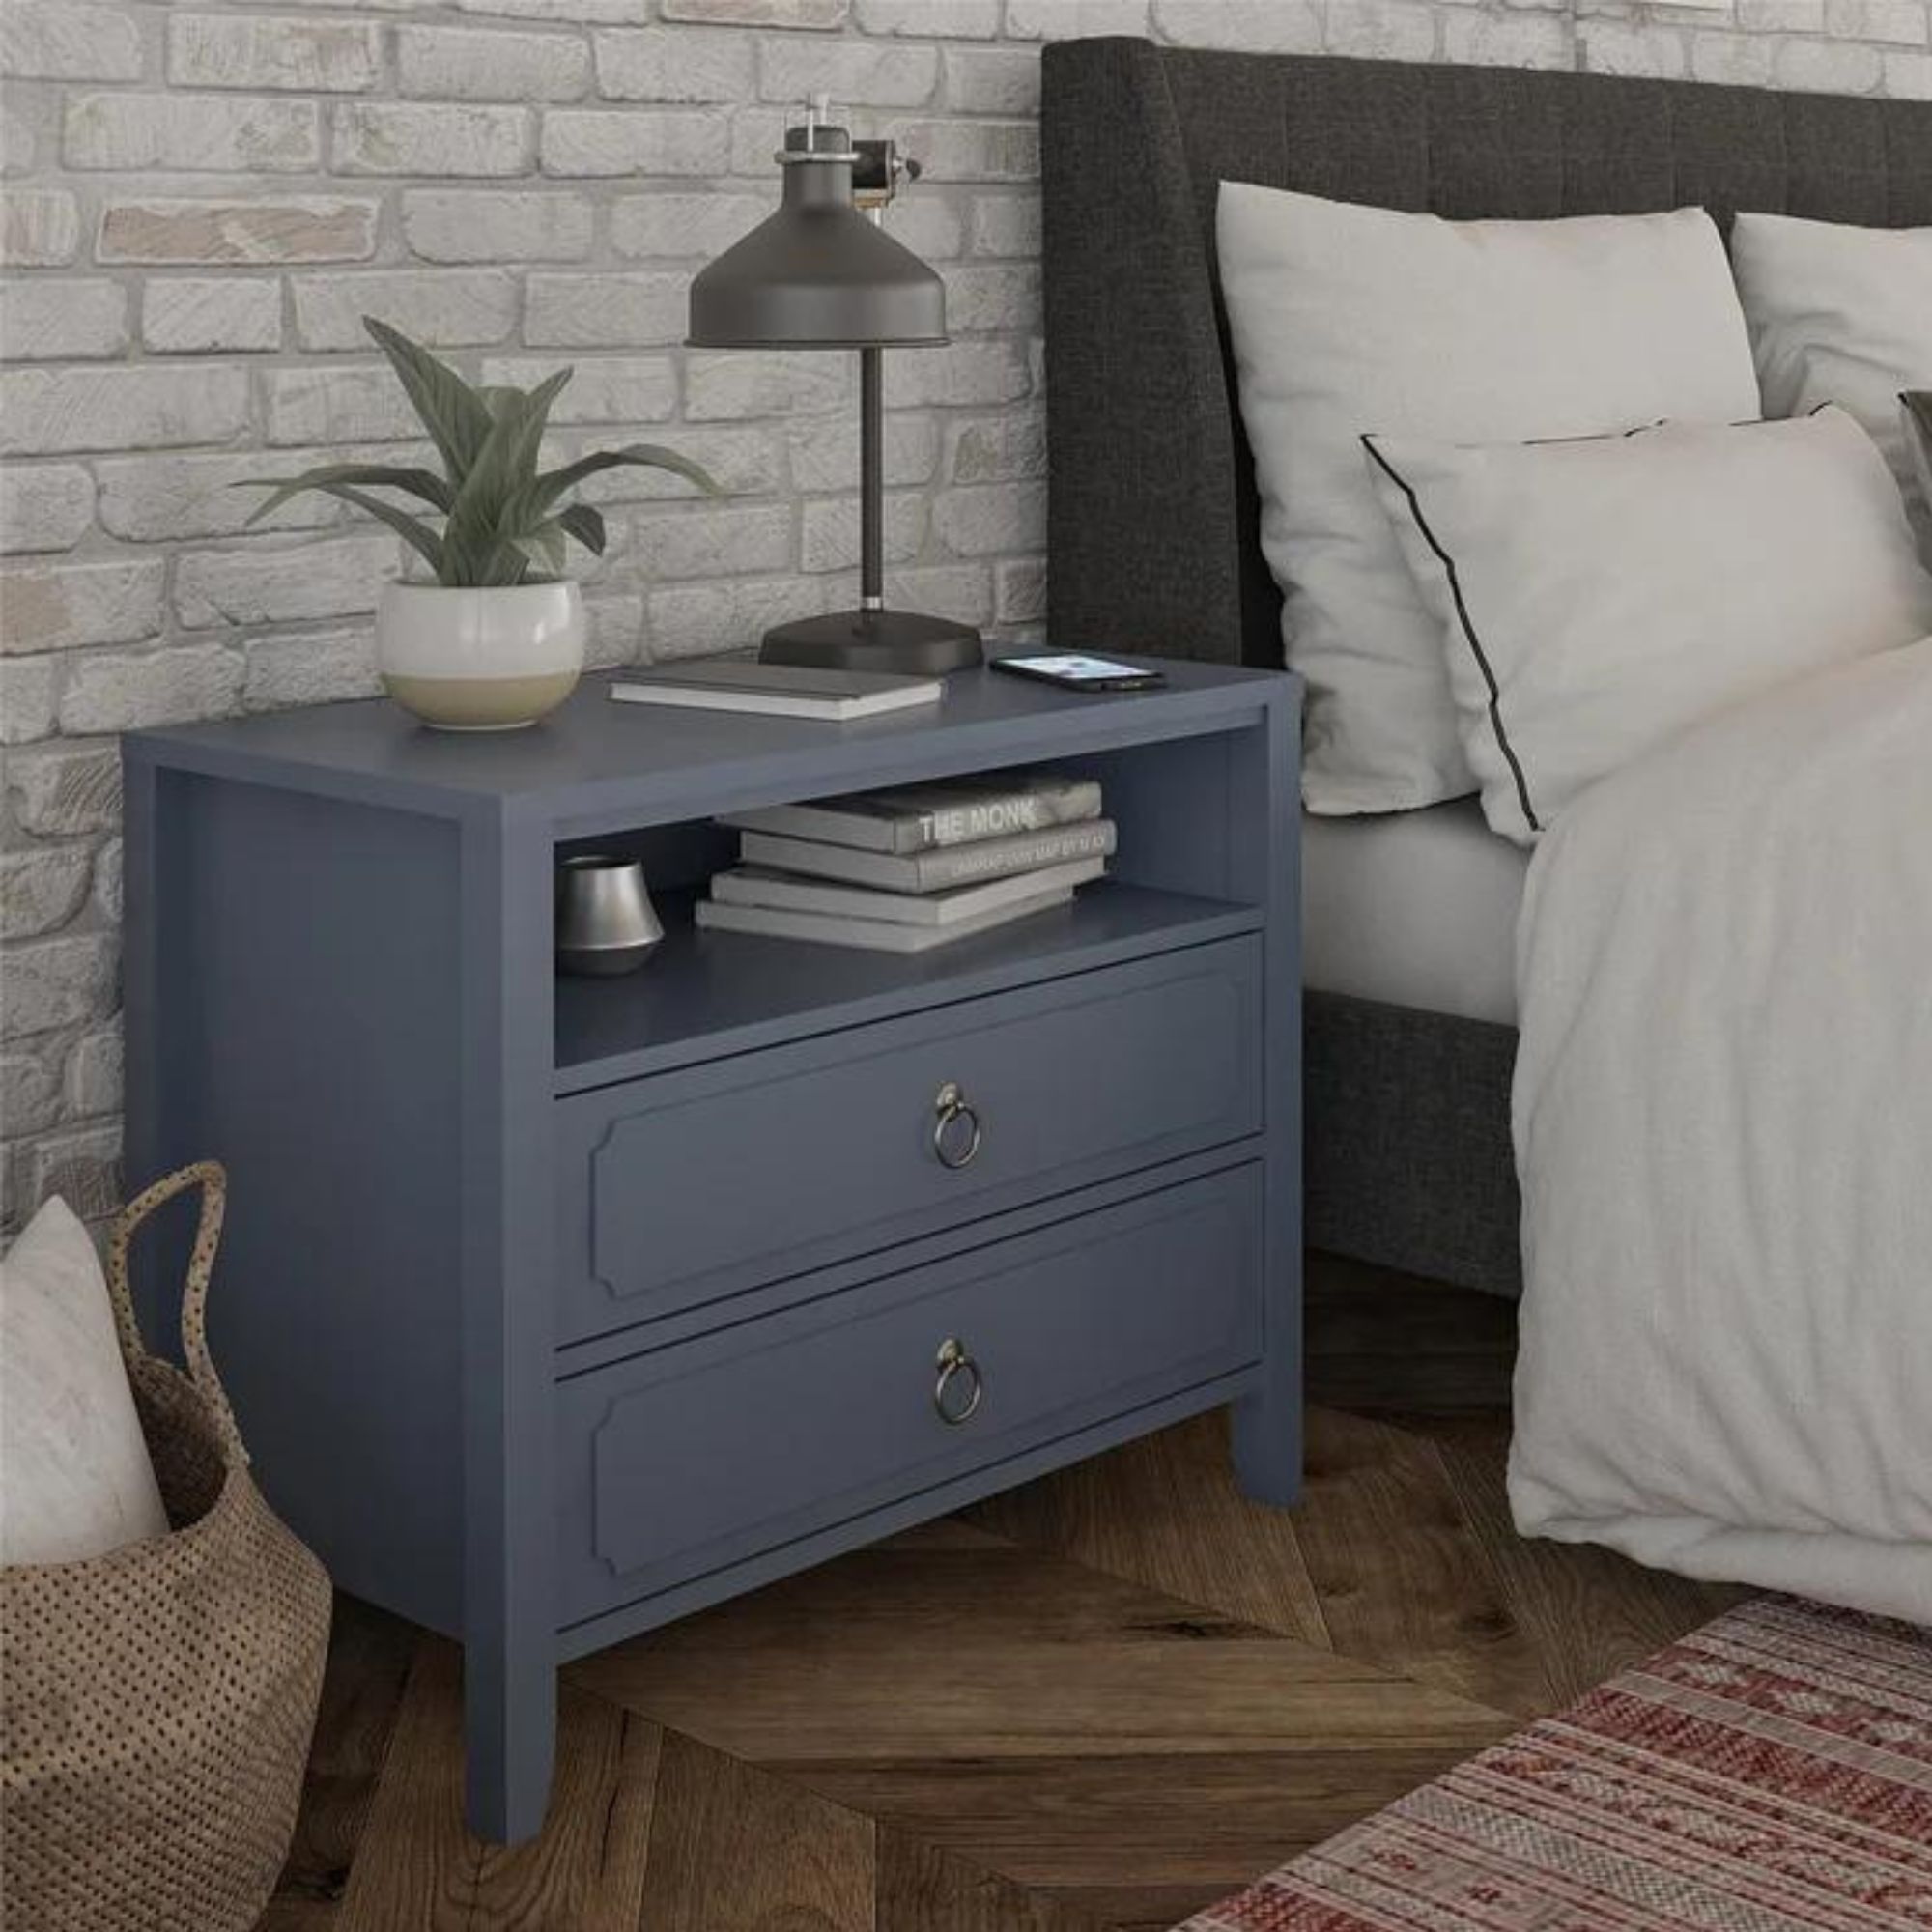 A blue nightstand with two drawers from Wayfair